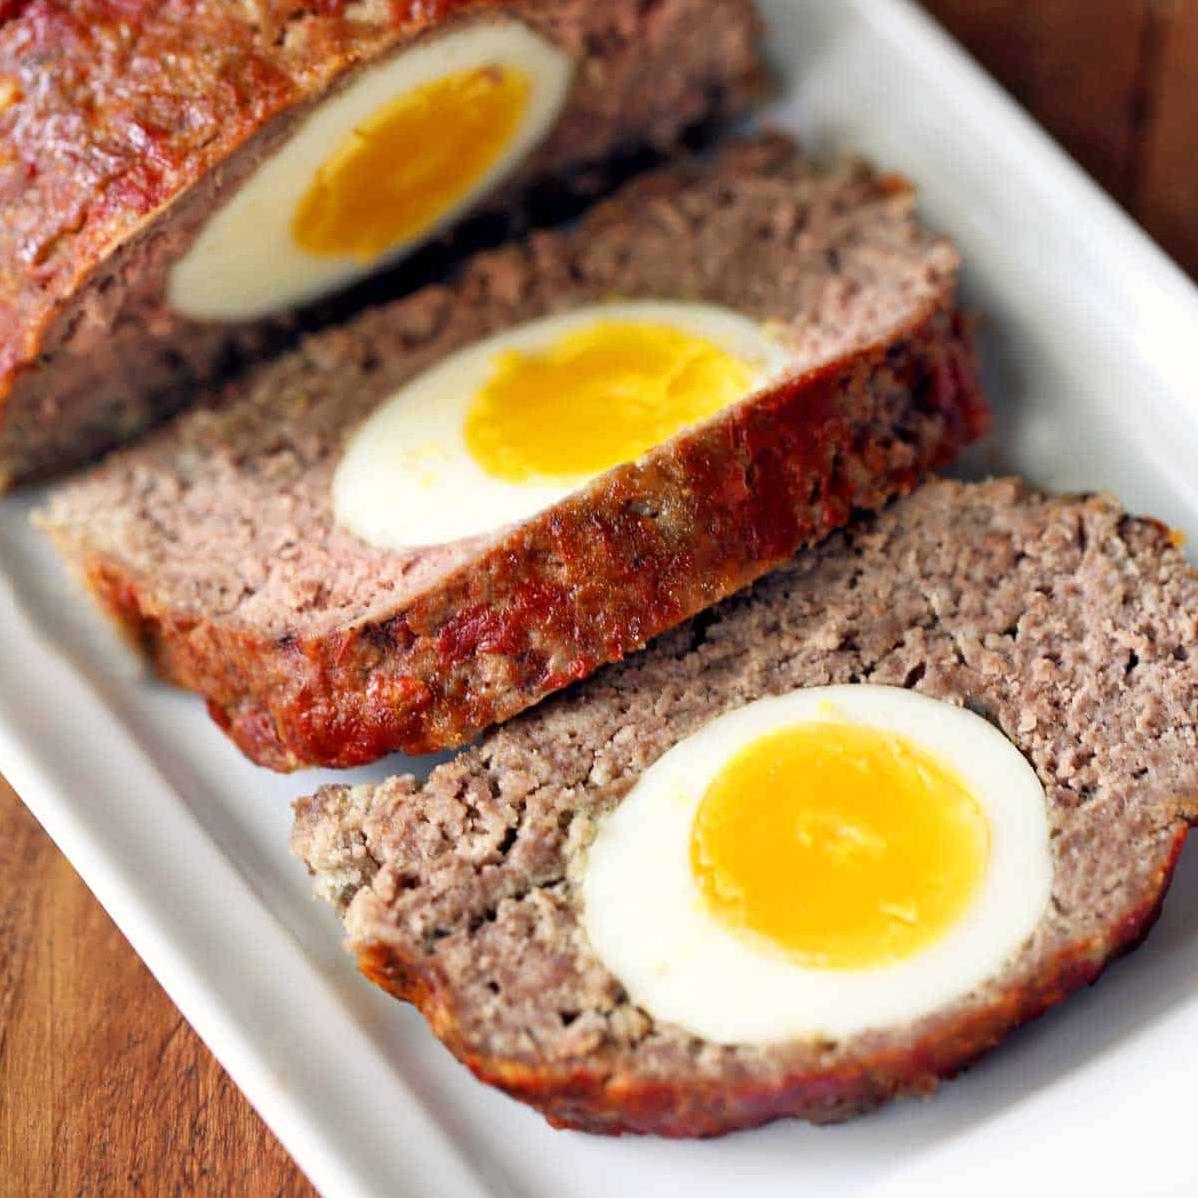  Get ready for the ultimate meatloaf - Scotch Eggs style!